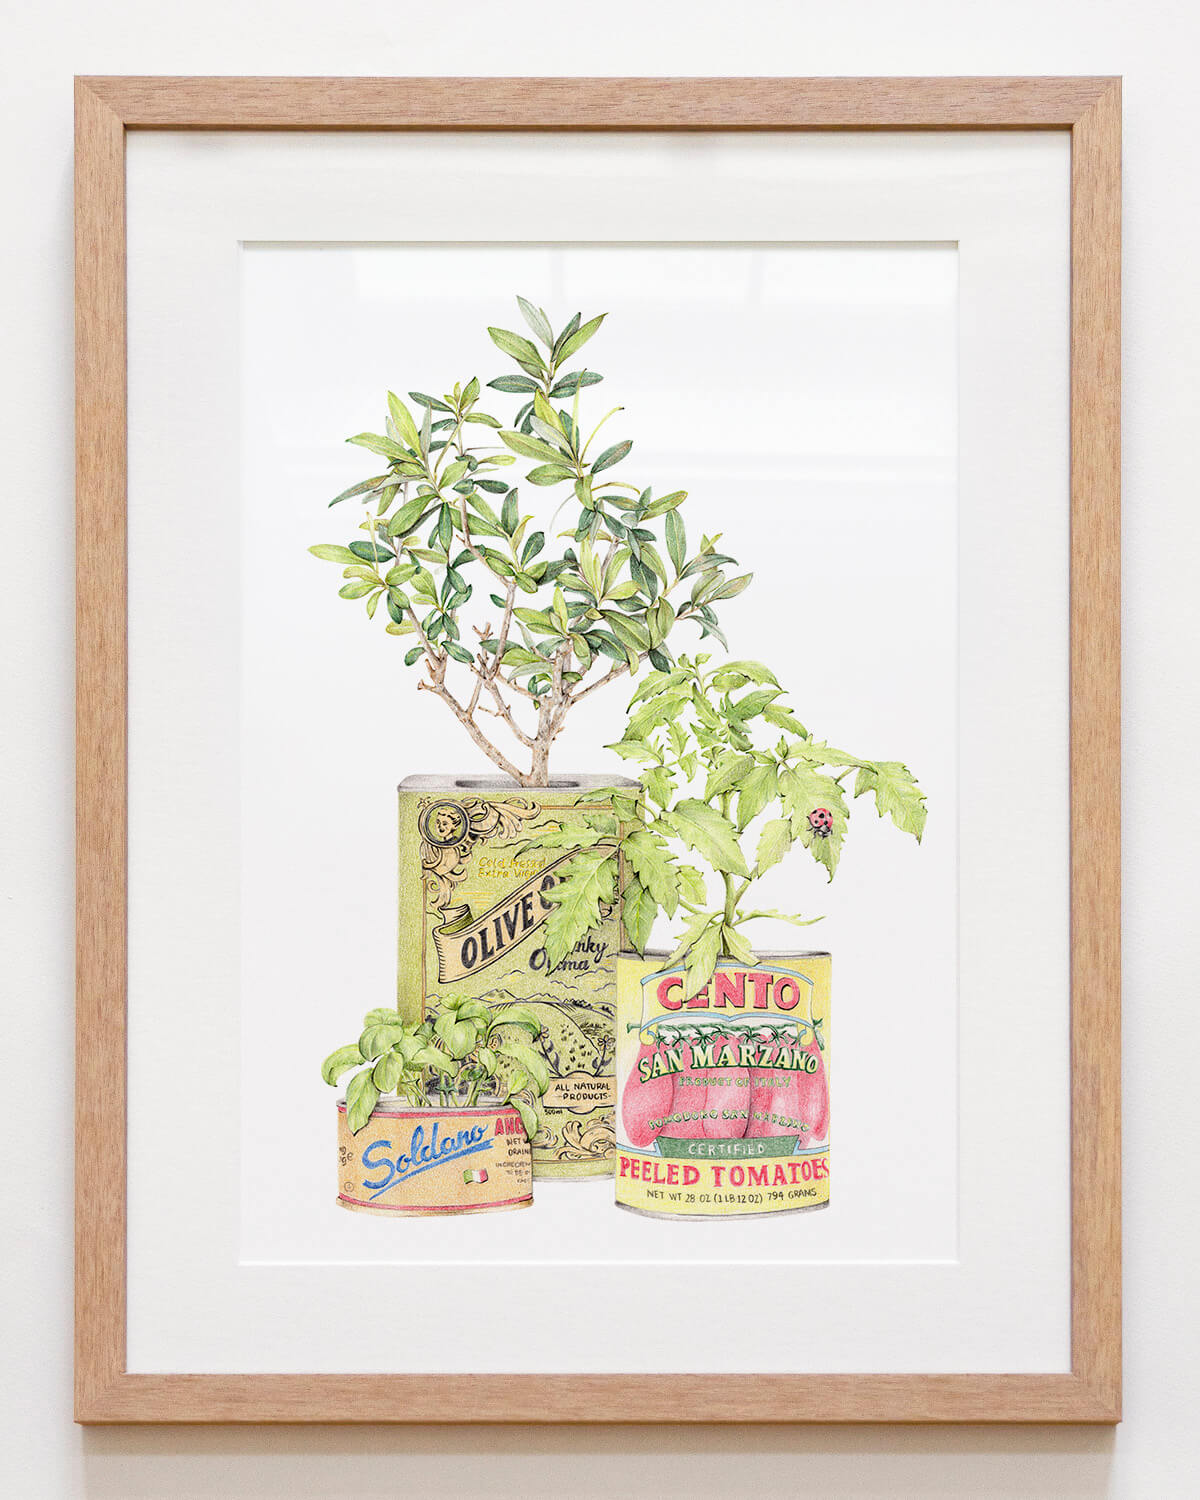 Kitchen wall art featuring classic Italian canned foods and herbs